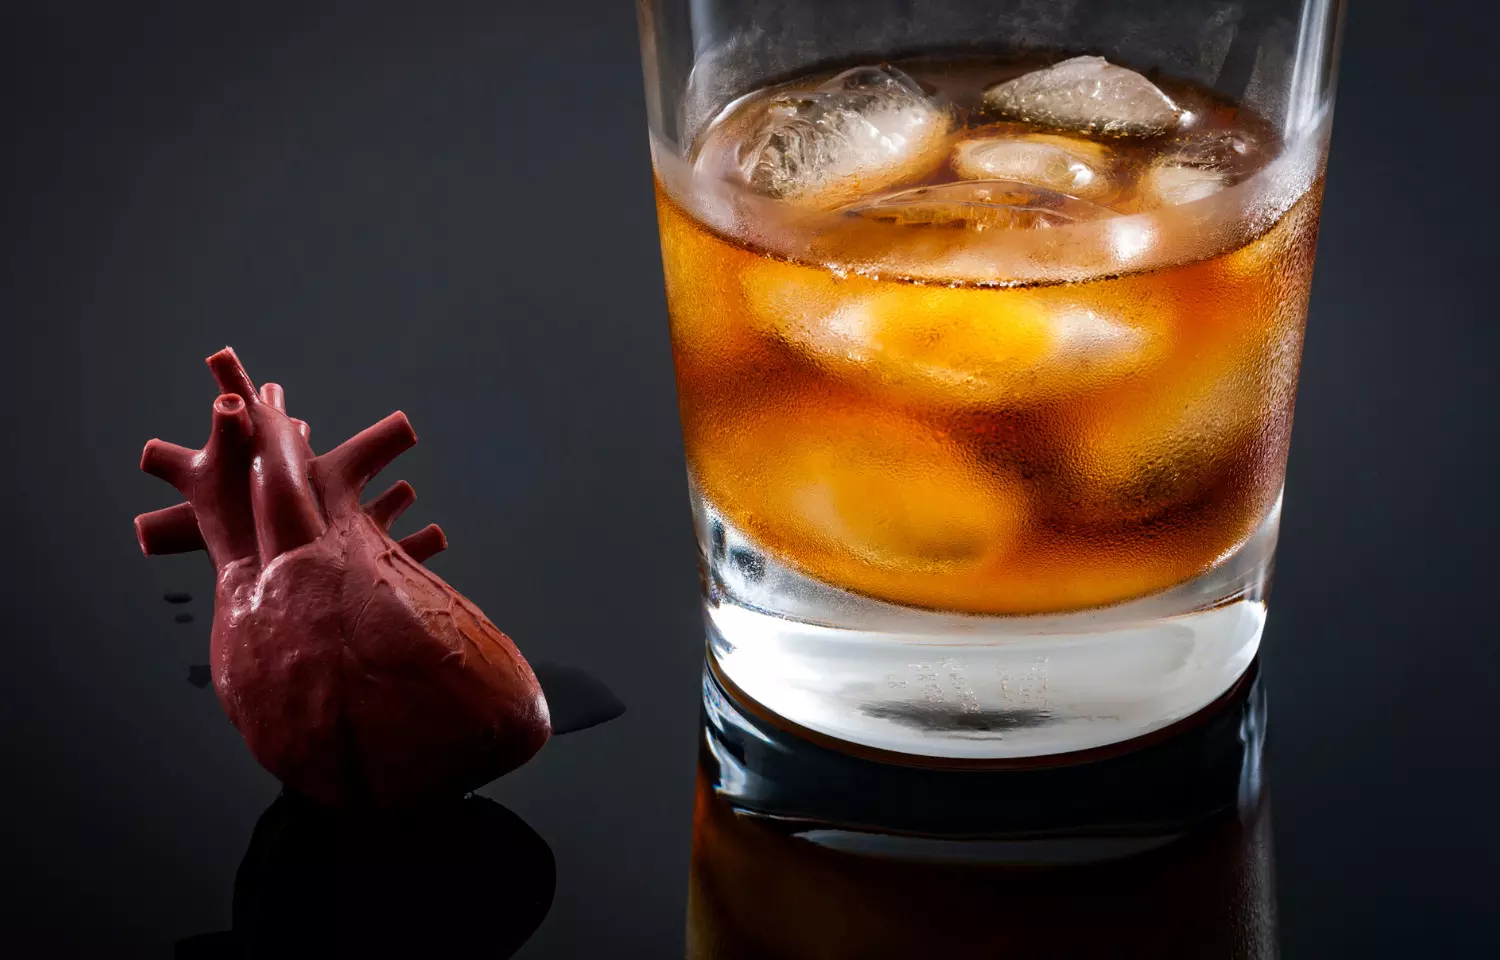 Alcohol levels considered safe by some linked to heart failure development